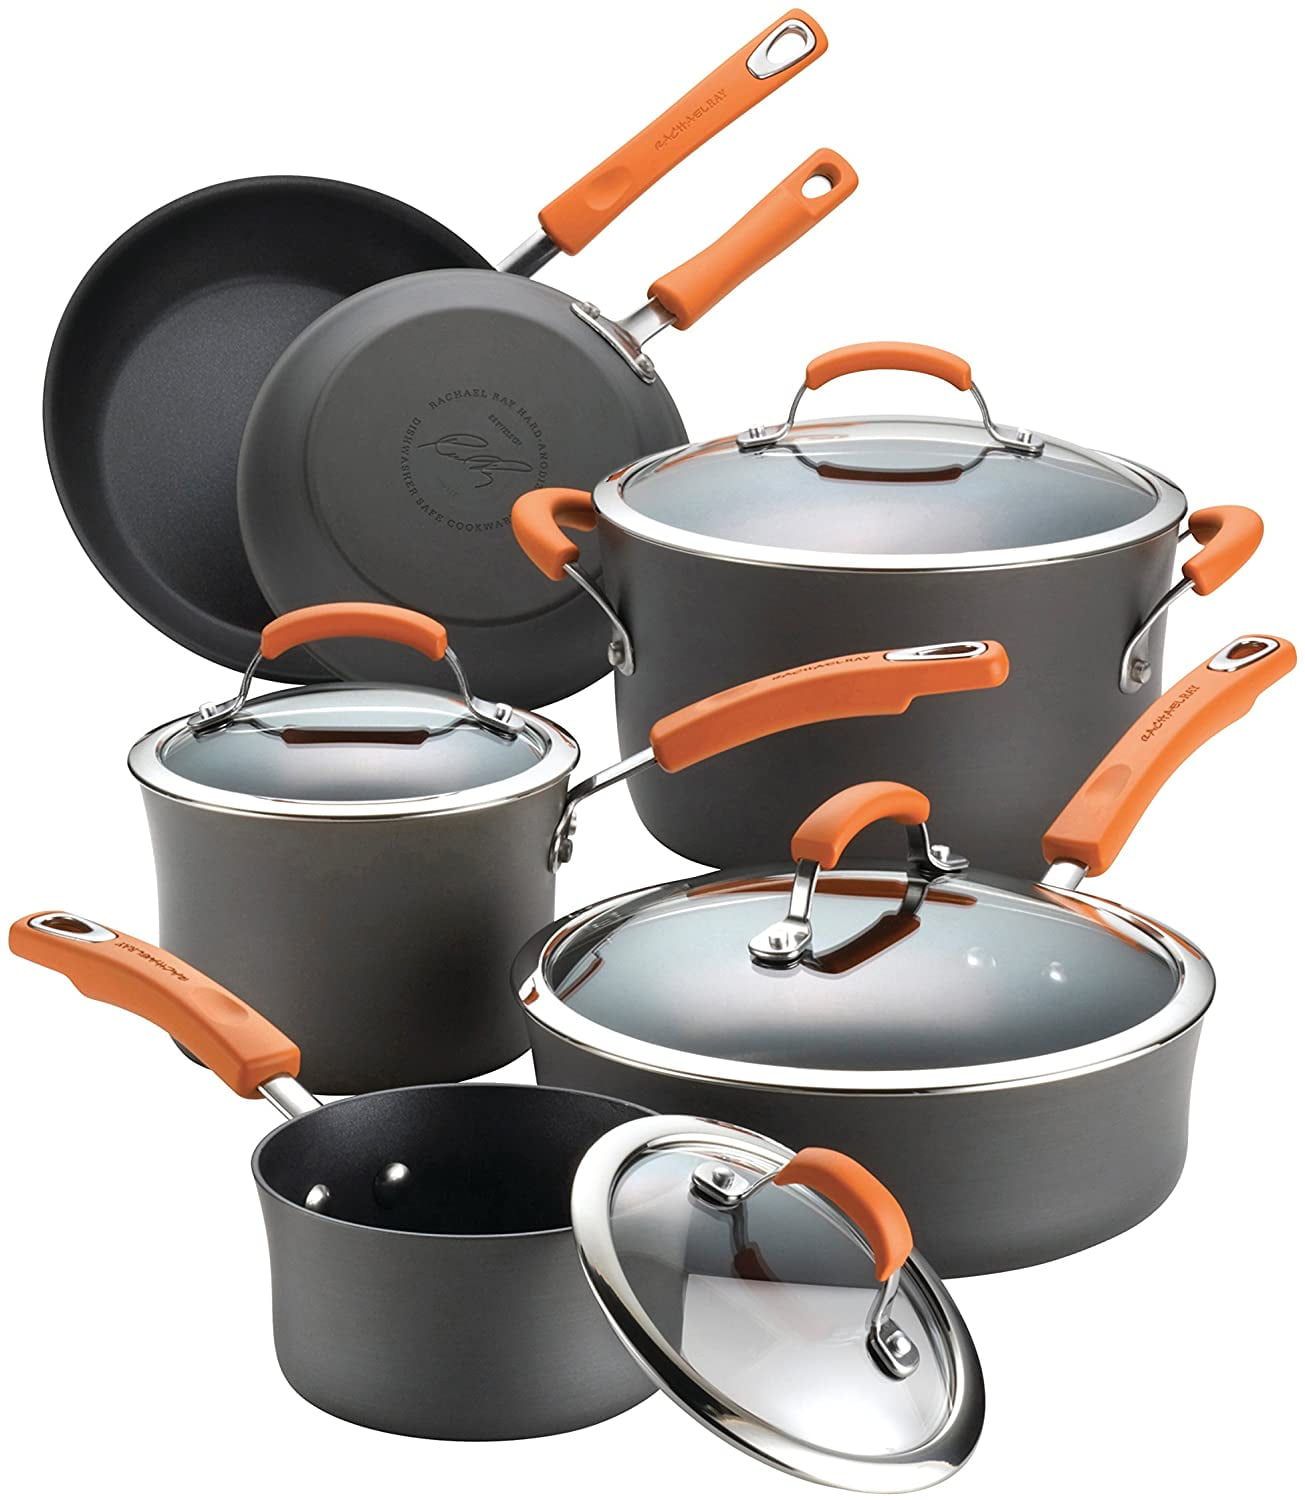 Rachael Ray Brights HardAnodized Aluminum Nonstick Cookware Set with